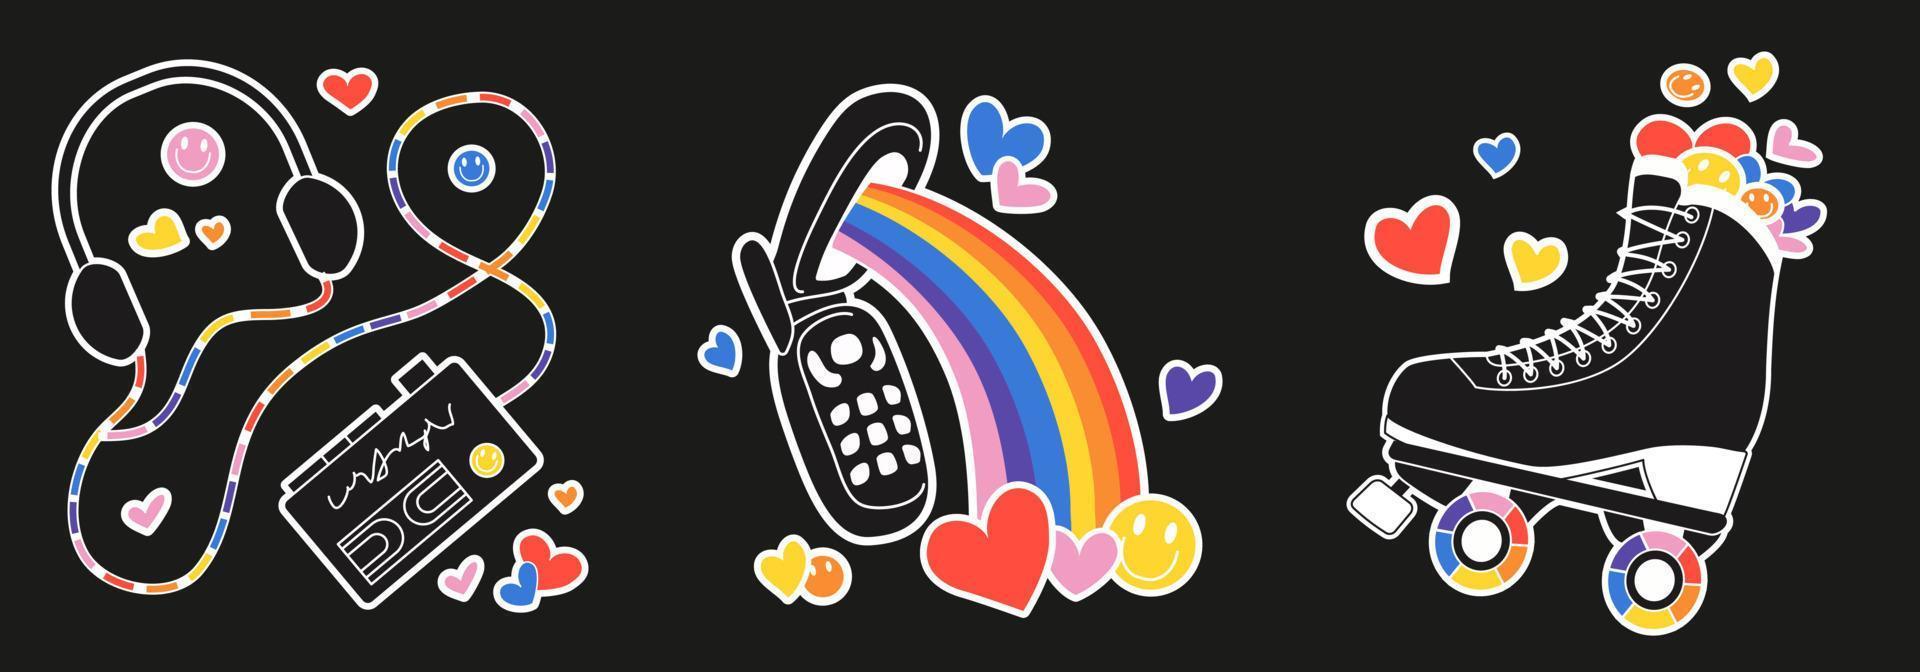 Set Cute girly roller skate sticker, flip phone and music player with rainbow in retrowave aesthetic. Girly y2k sticker, 90s and 2000s style vector